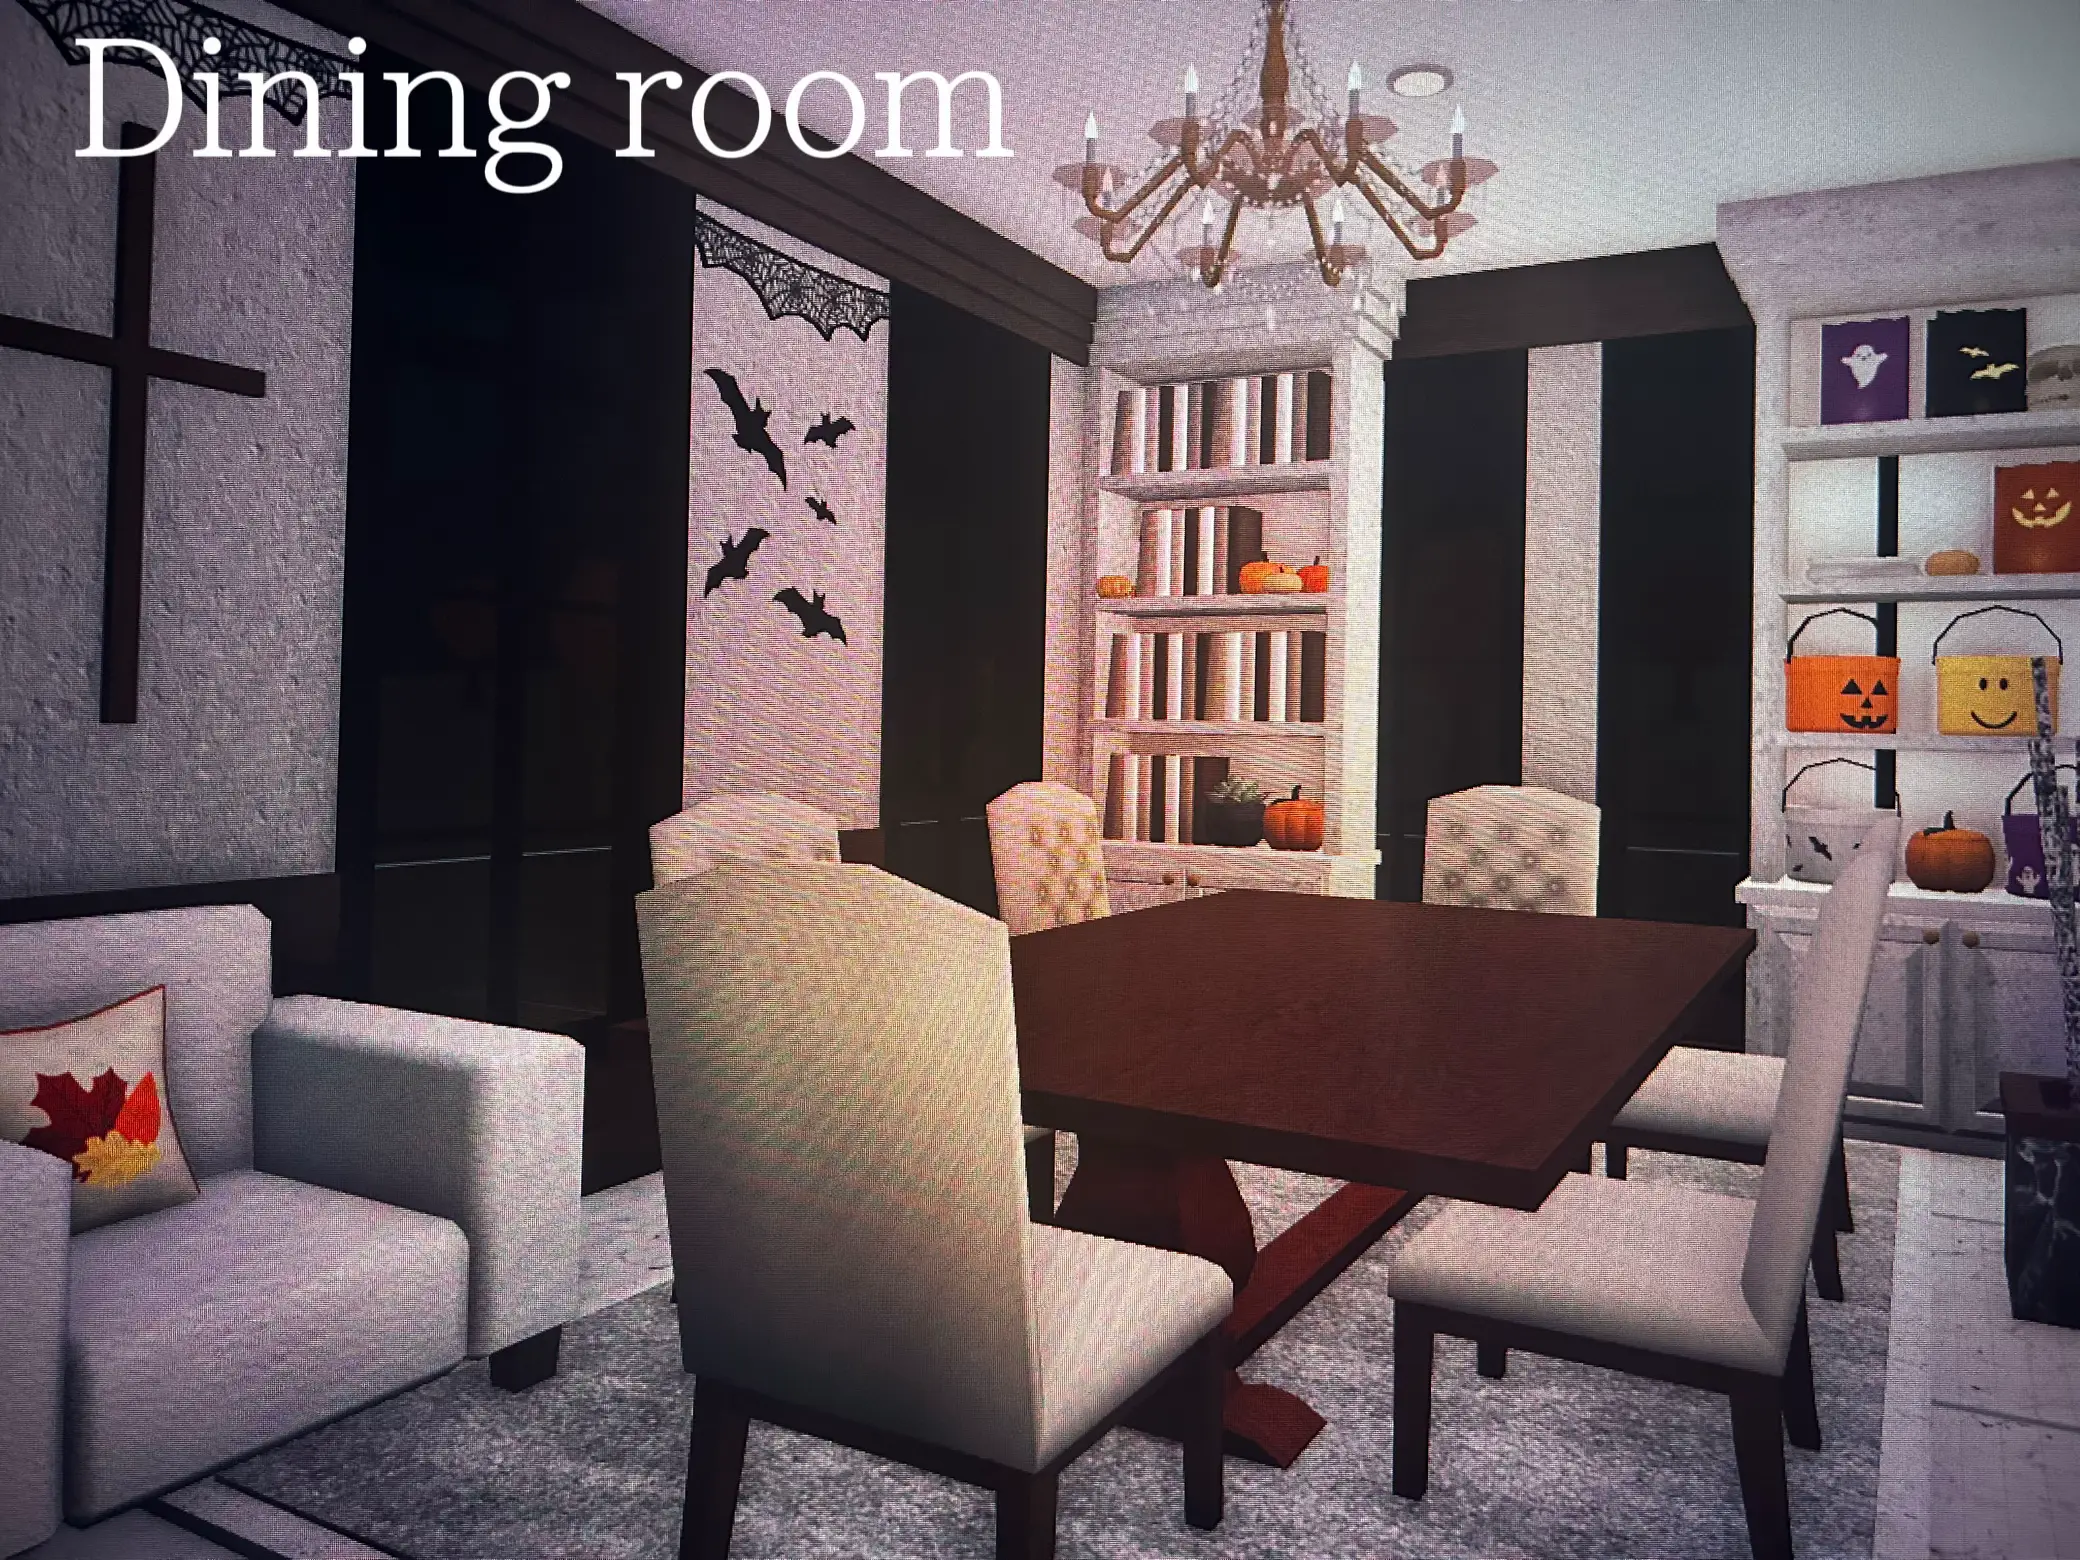 🎃Tour of my Halloween house on bloxburg!🎃, Gallery posted by Alanah <3